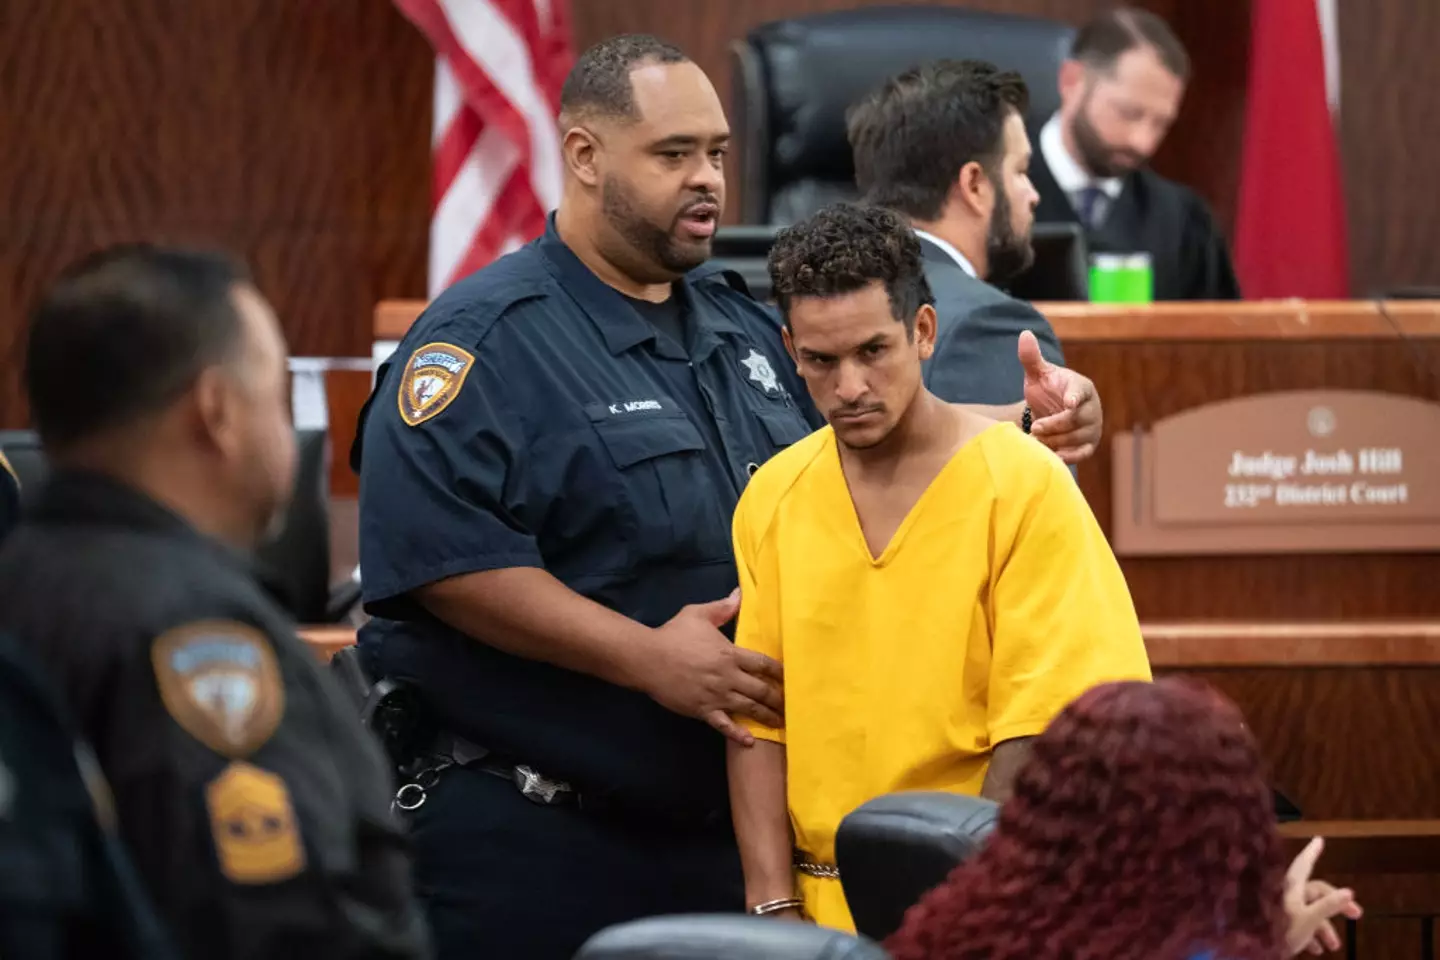 Franklin Pena the other man accused of killing the 12-year-old. (Brett Coomer/Houston Chronicle via Getty Images)